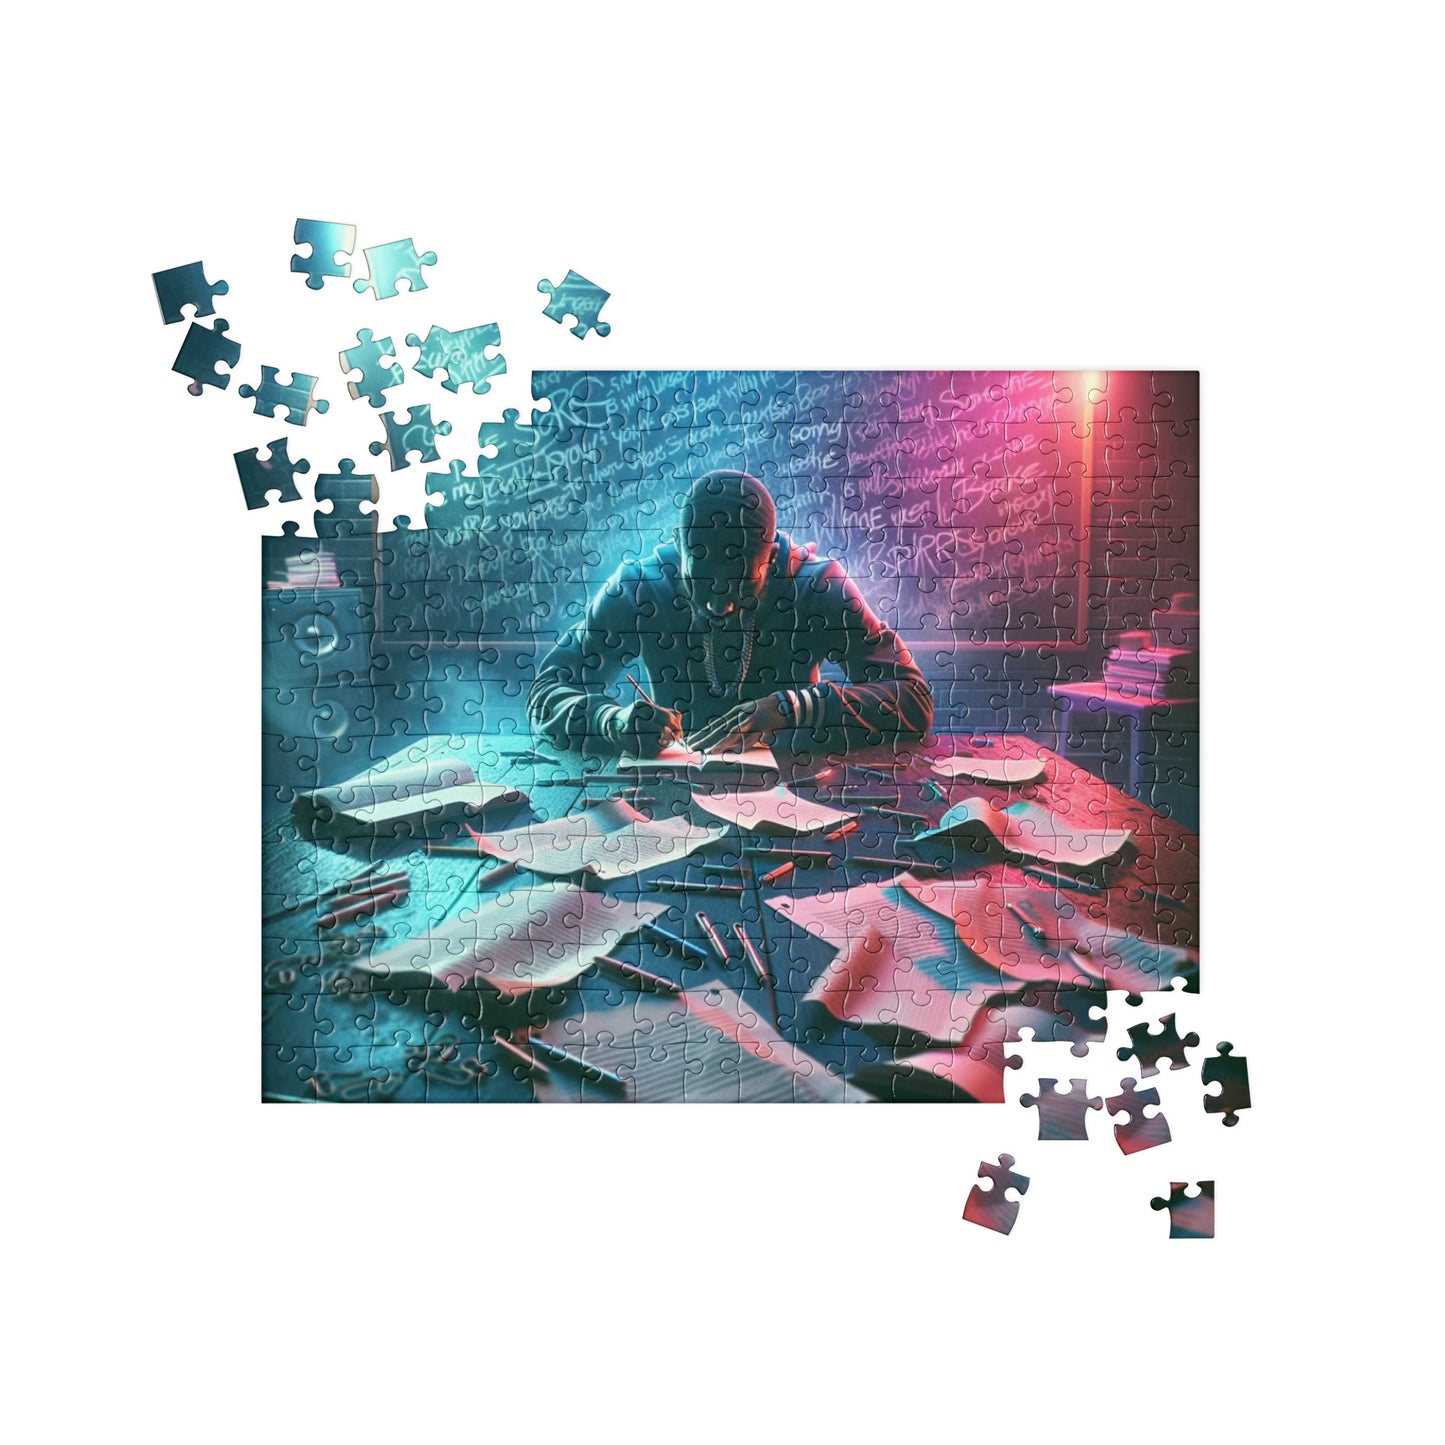 "Neon Muse Puzzle: Vibrant Rapper Composing Lyrics at Table with Chalkboard of Rhymes - Creativity and Passion Captured in Neon"